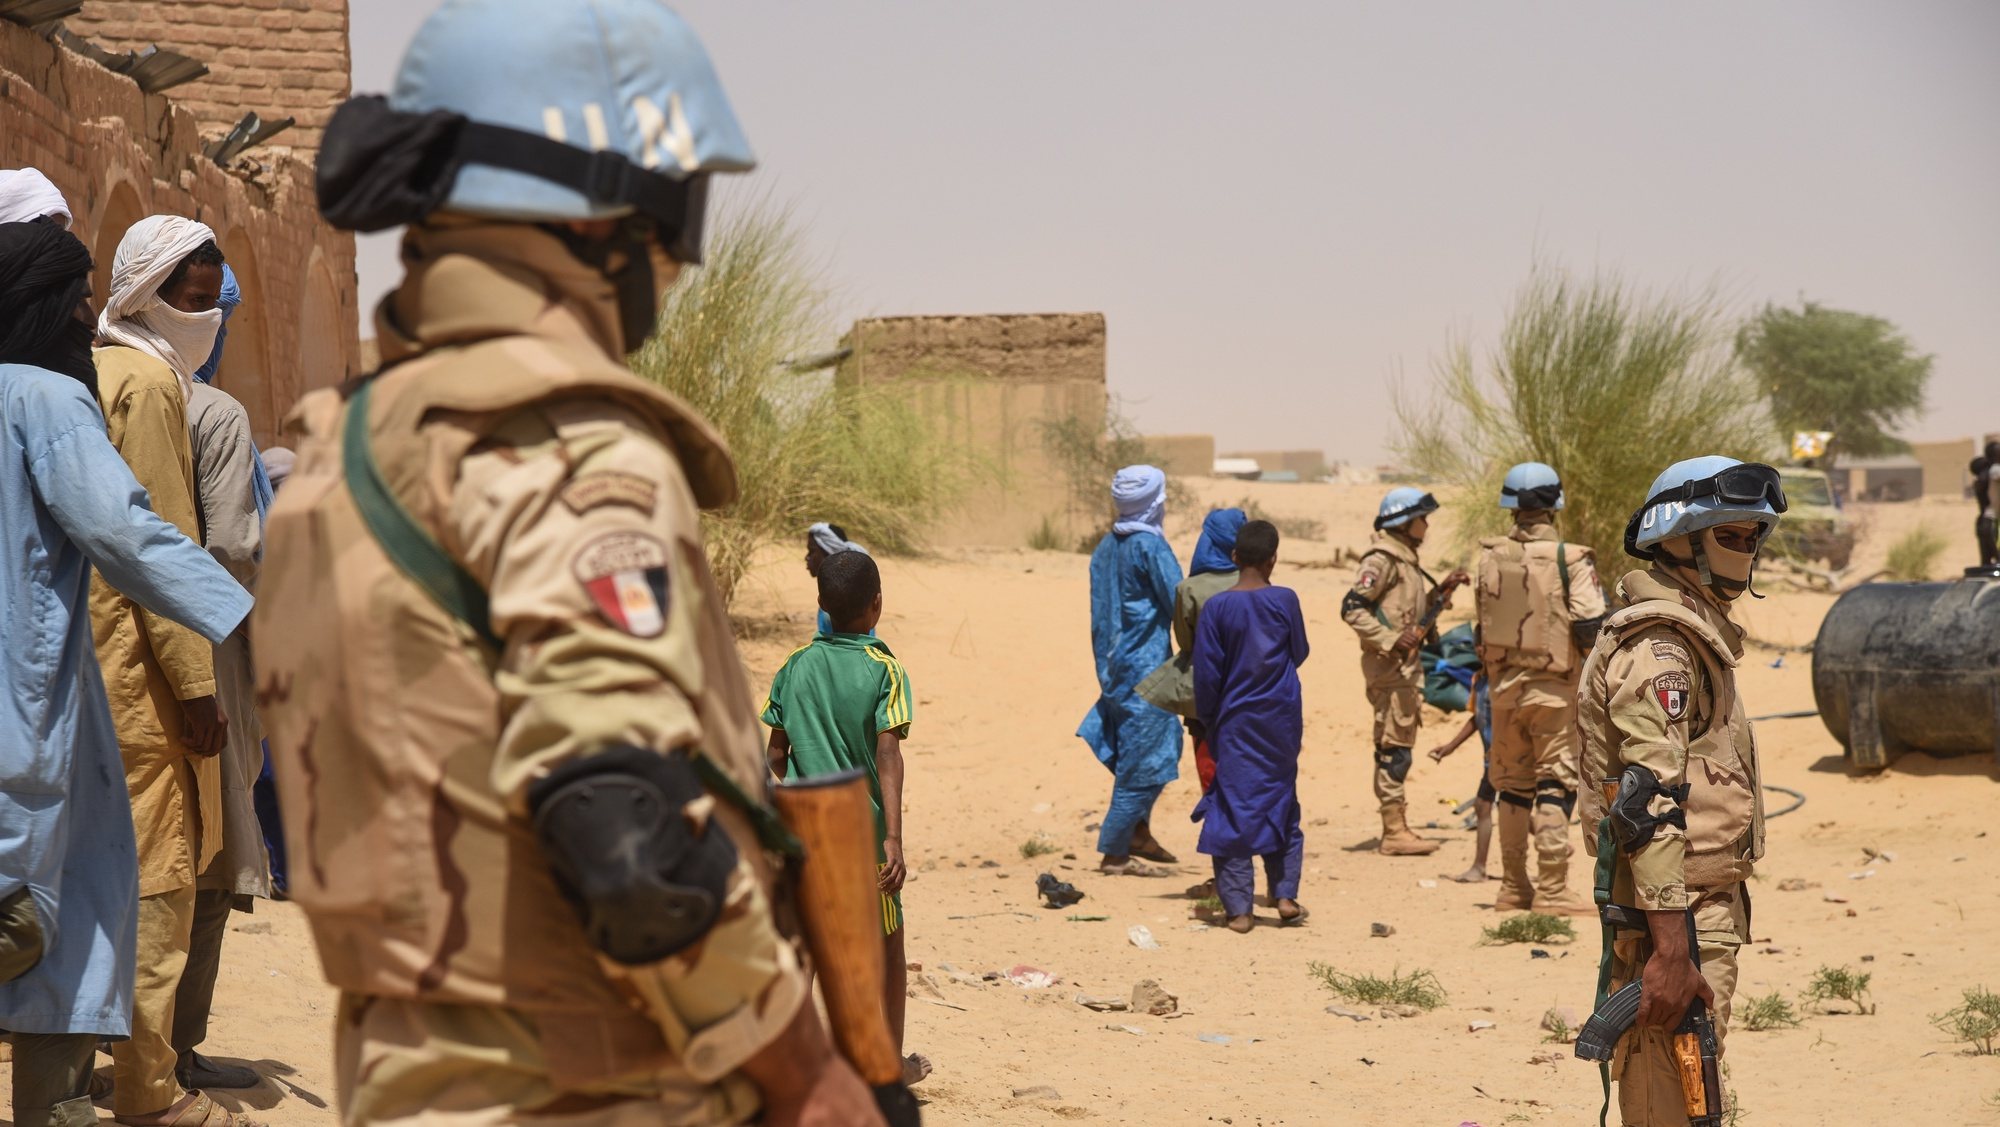 epa07558008 United Nations (UN) Peacekeepers secure the area as part of a United Nations High Commissioner for Refugees (UNHCR) and United Nations Multidimensional Integrated Stabilization Mission in Mali (MINUSMA) delegation visit Koygouma in the Timbuktu Region of Mali, 06 May 2019 (issued 09 May 2019). This visit follows the repatriation of 2086 Malian refugees from the Mbera camp in Mauritania last April, who had to flee conflict in 2013. Vehicles from the High Council for Azawad Unity (HCUA) also came to secure the area. In Koygouma the HCUA member of the Coordination of Azawad movements (CMA) is very present. This rebel group that signed the Algiers peace agreement mainly composed of Ansar Dine dissidents is often criticized for its double game with Ansar Dine jihadists and its proximity to Iyad Ag Ghali. Although the security situation in Mali is still volatile, according to UNHCR, many refugees decided to return to Mali.  EPA/NICOLAS REMENE  ATTENTION: This Image is part of a PHOTO SET